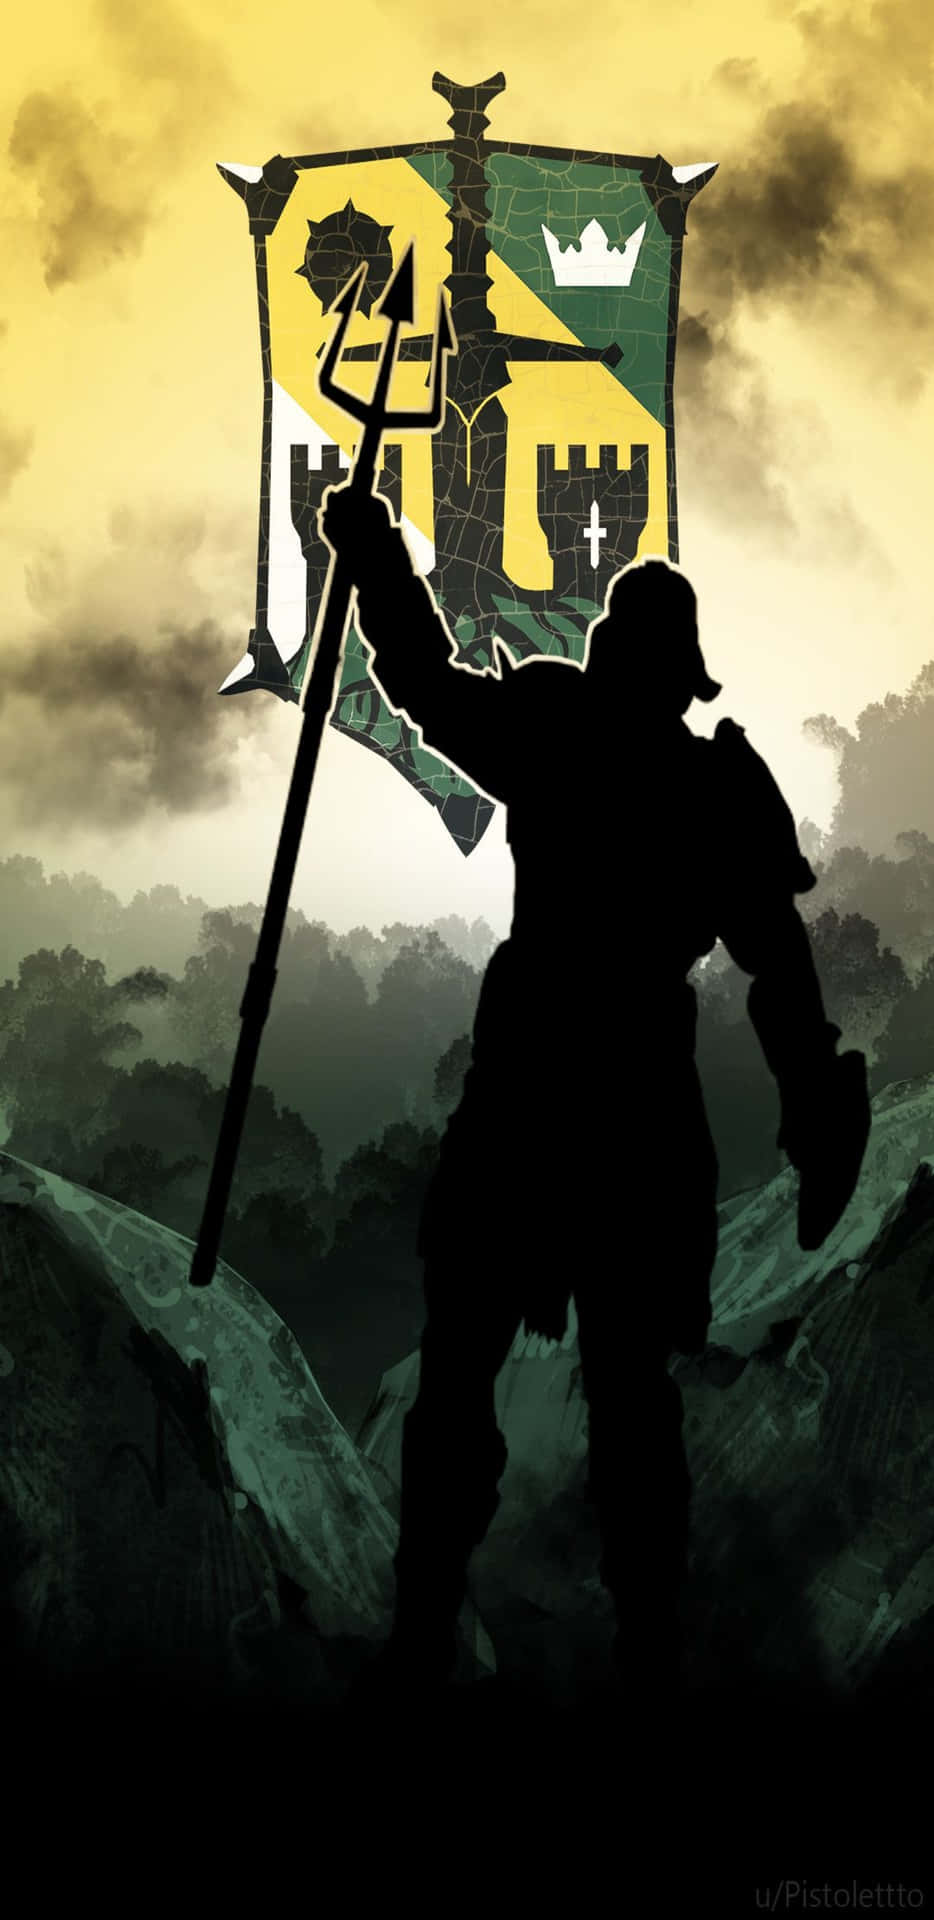 Pixel 3xl For Honor Gladiator Crest Background